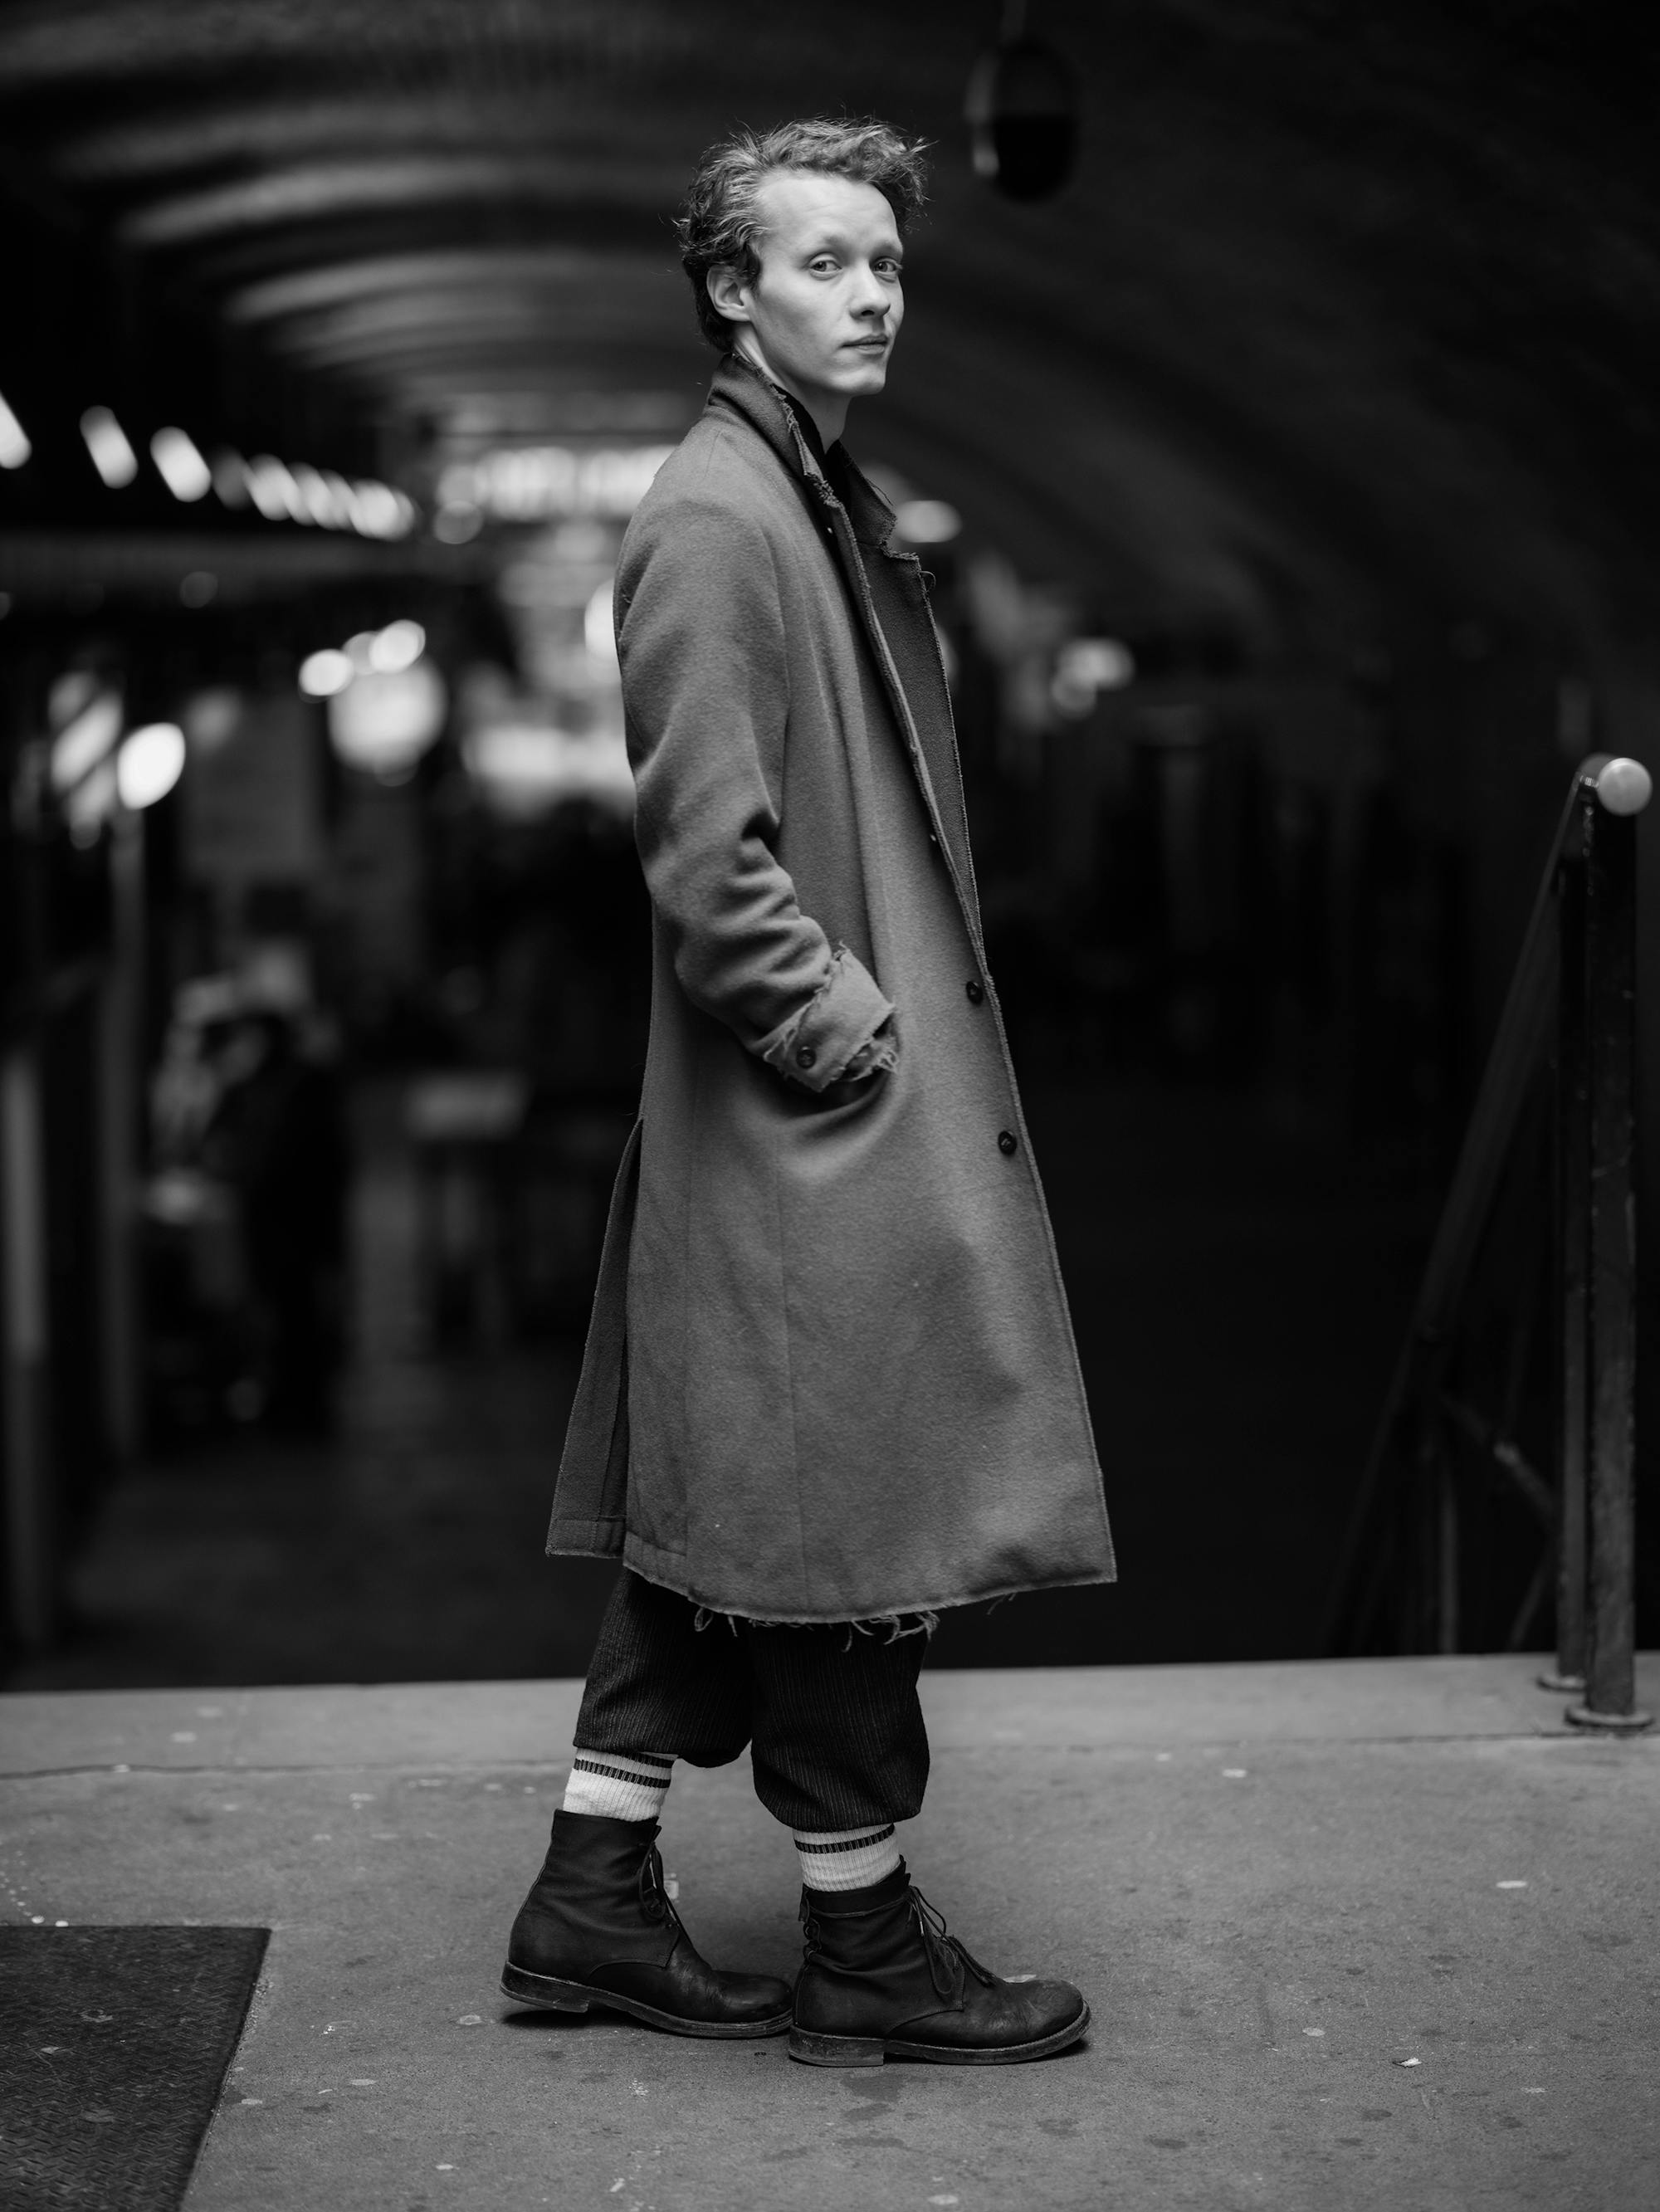 Felix Kammerer looks way cleaner than he does in the film. He wears a long coat, dark pants, and dark boots. He stands in what looks like a train station.